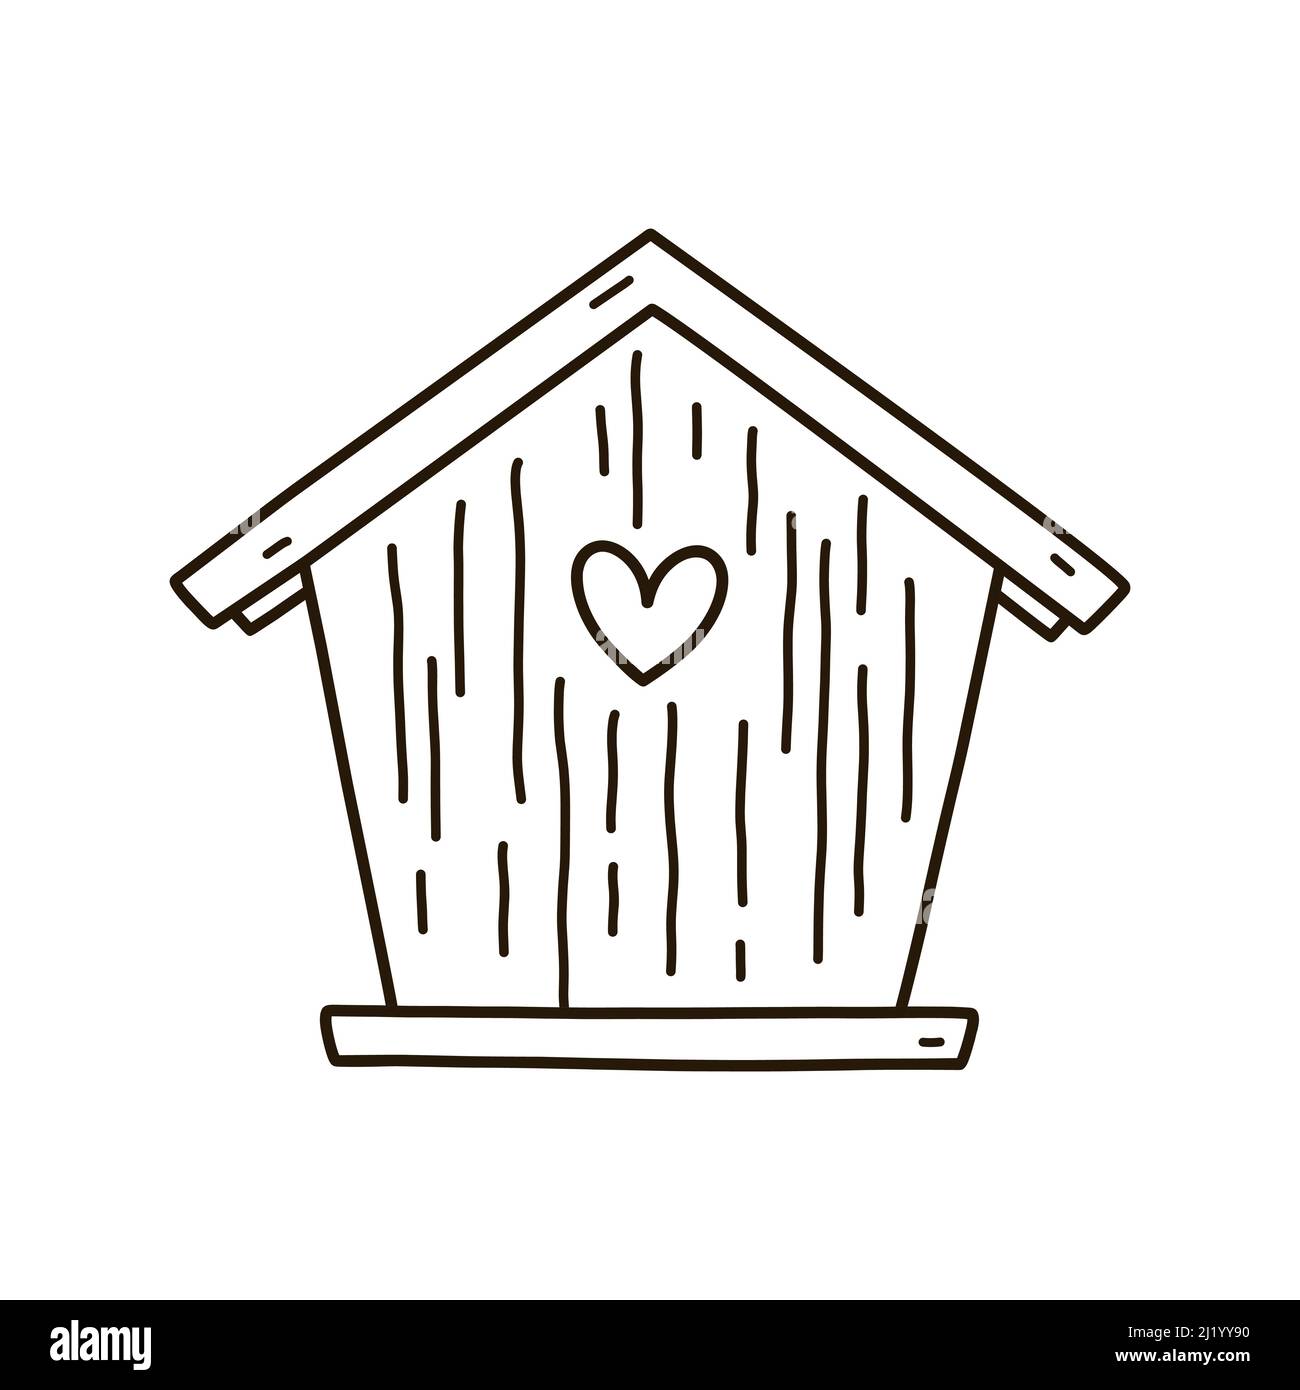 Cute wooden birdhouse isolated on white background. Vector hand-drawn illustration in doodle style. Perfect for holiday and spring designs, cards Stock Vector